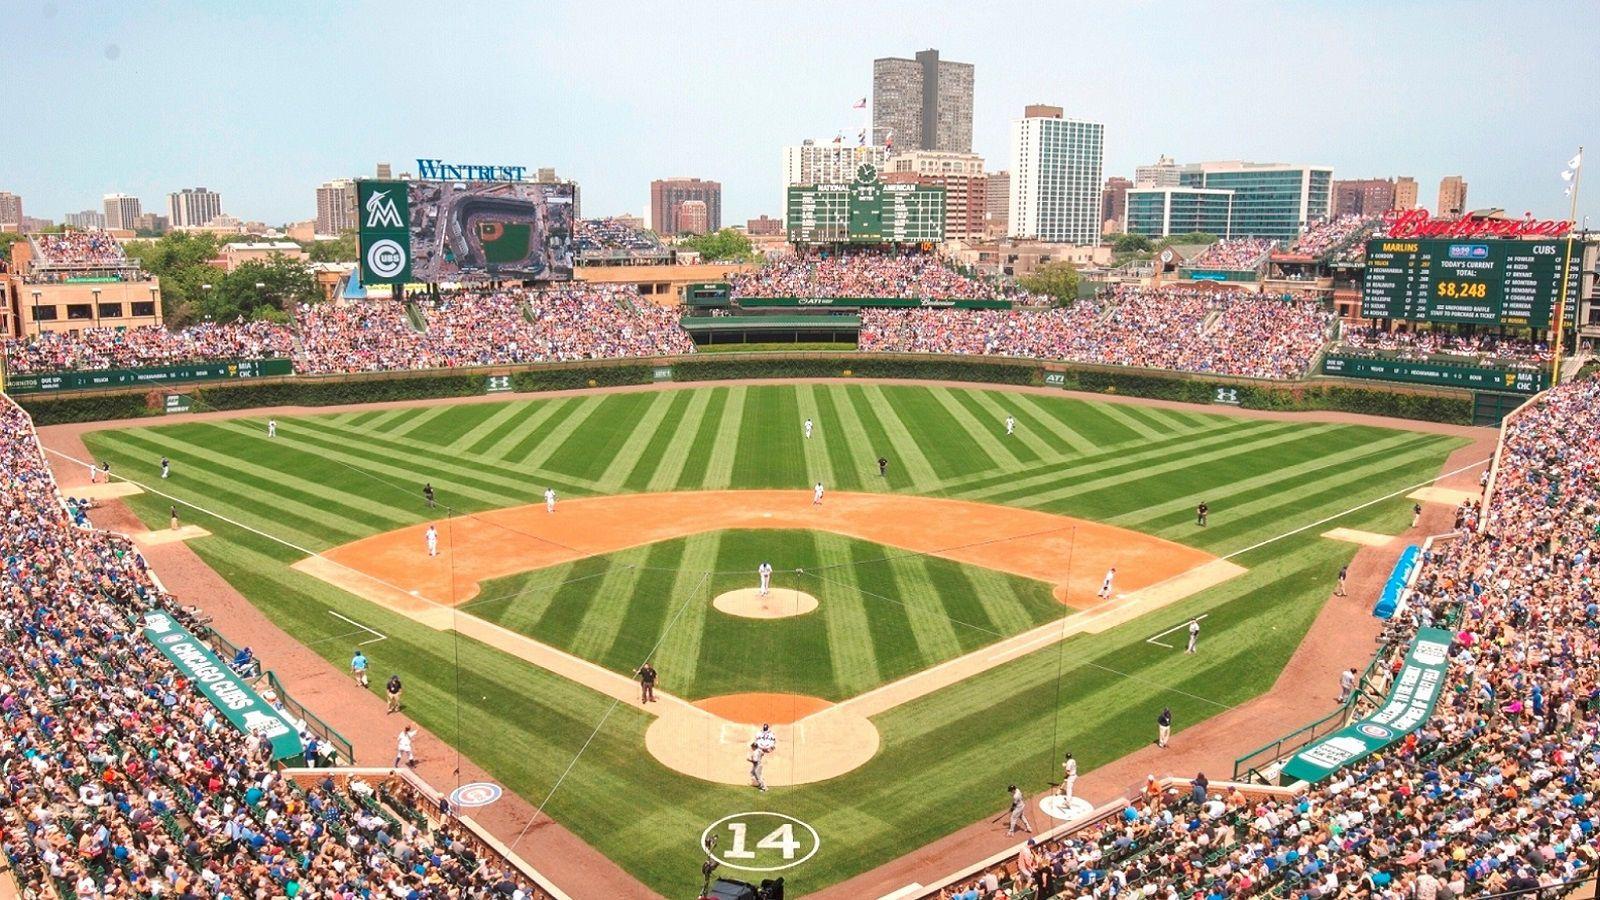 Chicago Hotels Near Wrigley Field. The Tremont Chicago Hotel at